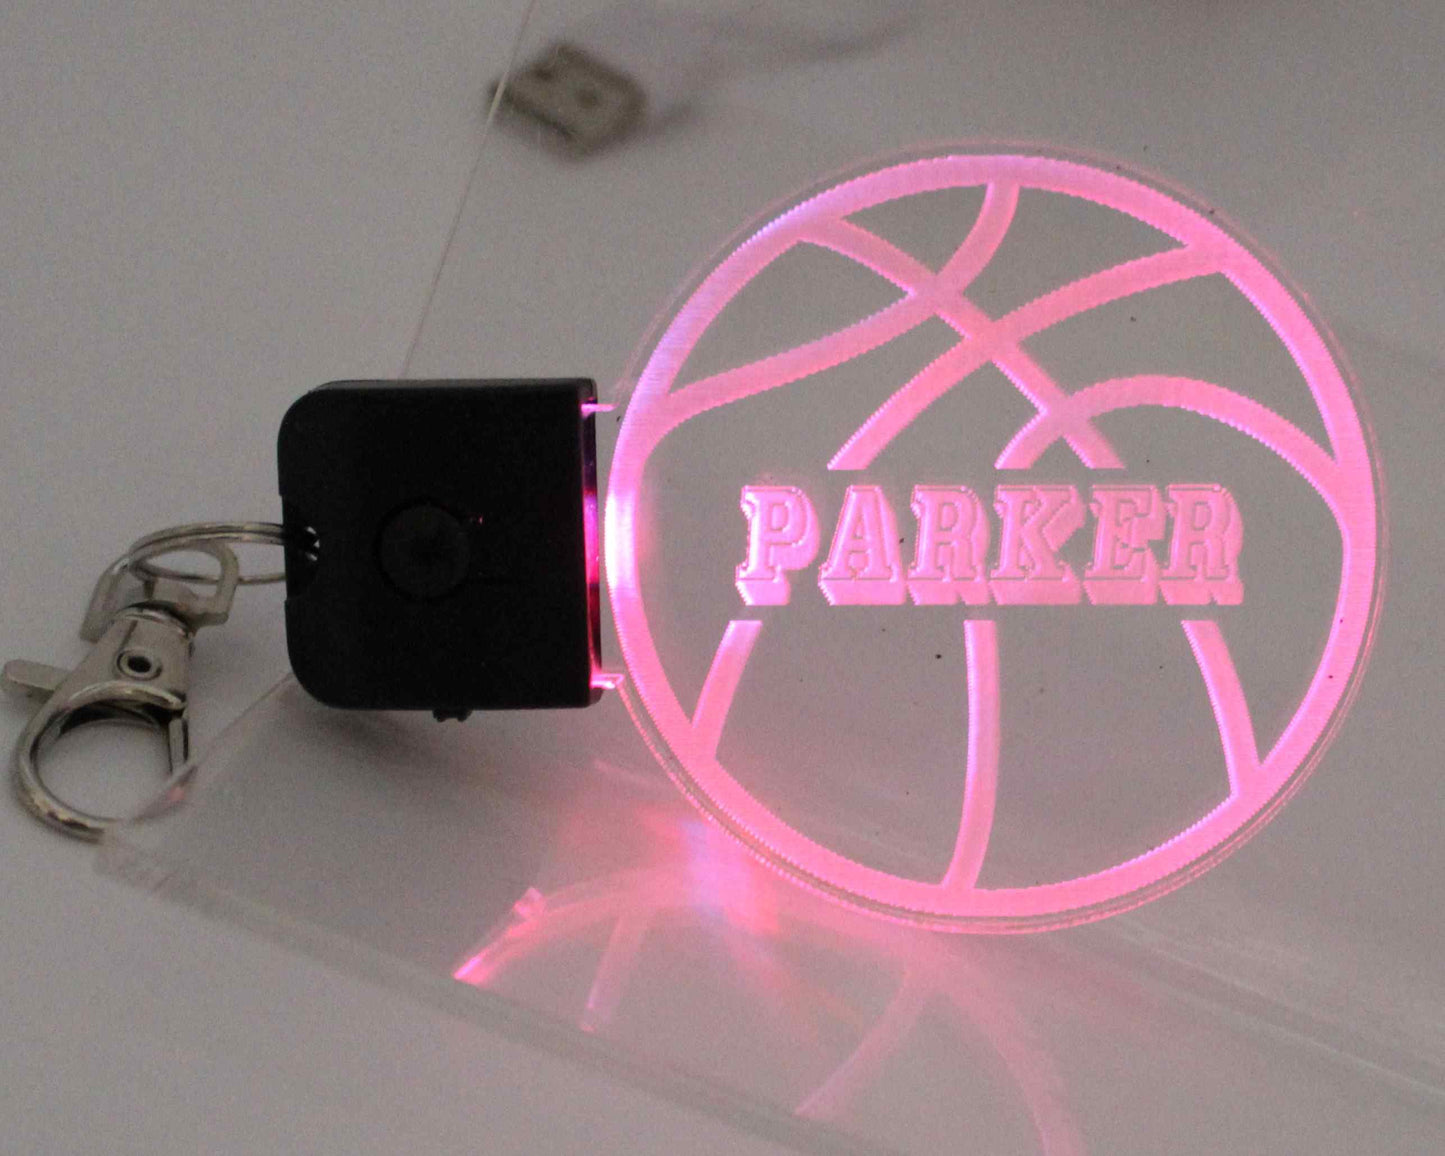 basketball multi changing colours keychain - Haisley Design